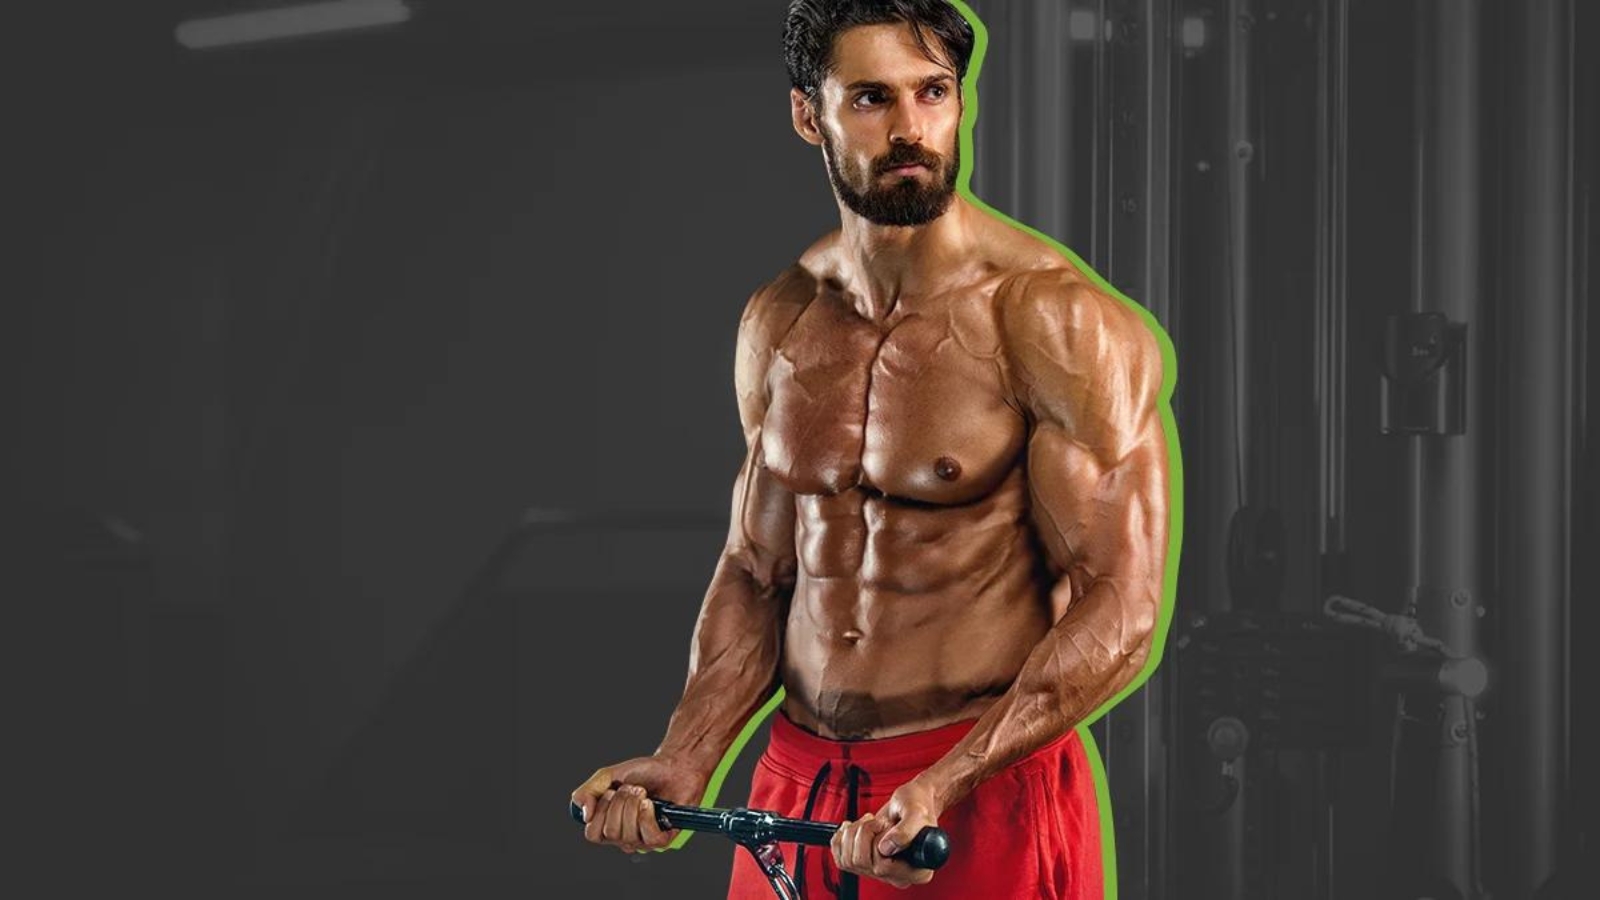 The Ultimate Biceps Burnout: Quick 20 Minute Workout for Your Biceps